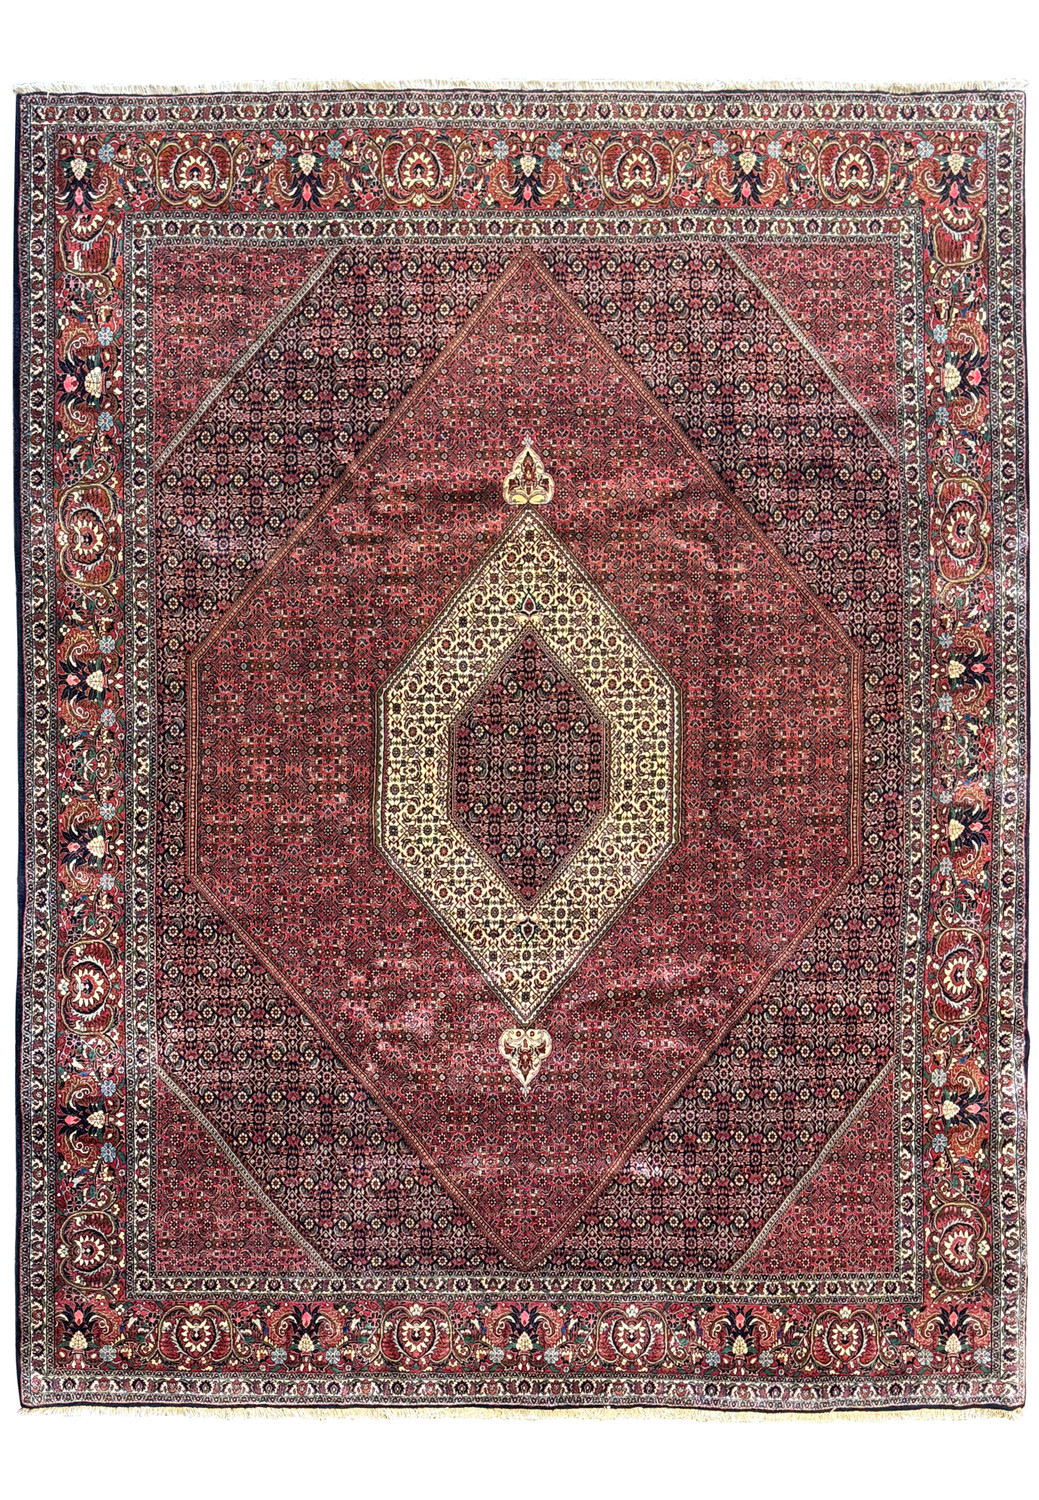 Overhead view of a 9'8 x 12'6 Persian Bijar rug showcasing the entire pattern with a central medallion and ornate borders in deep red and cream hues